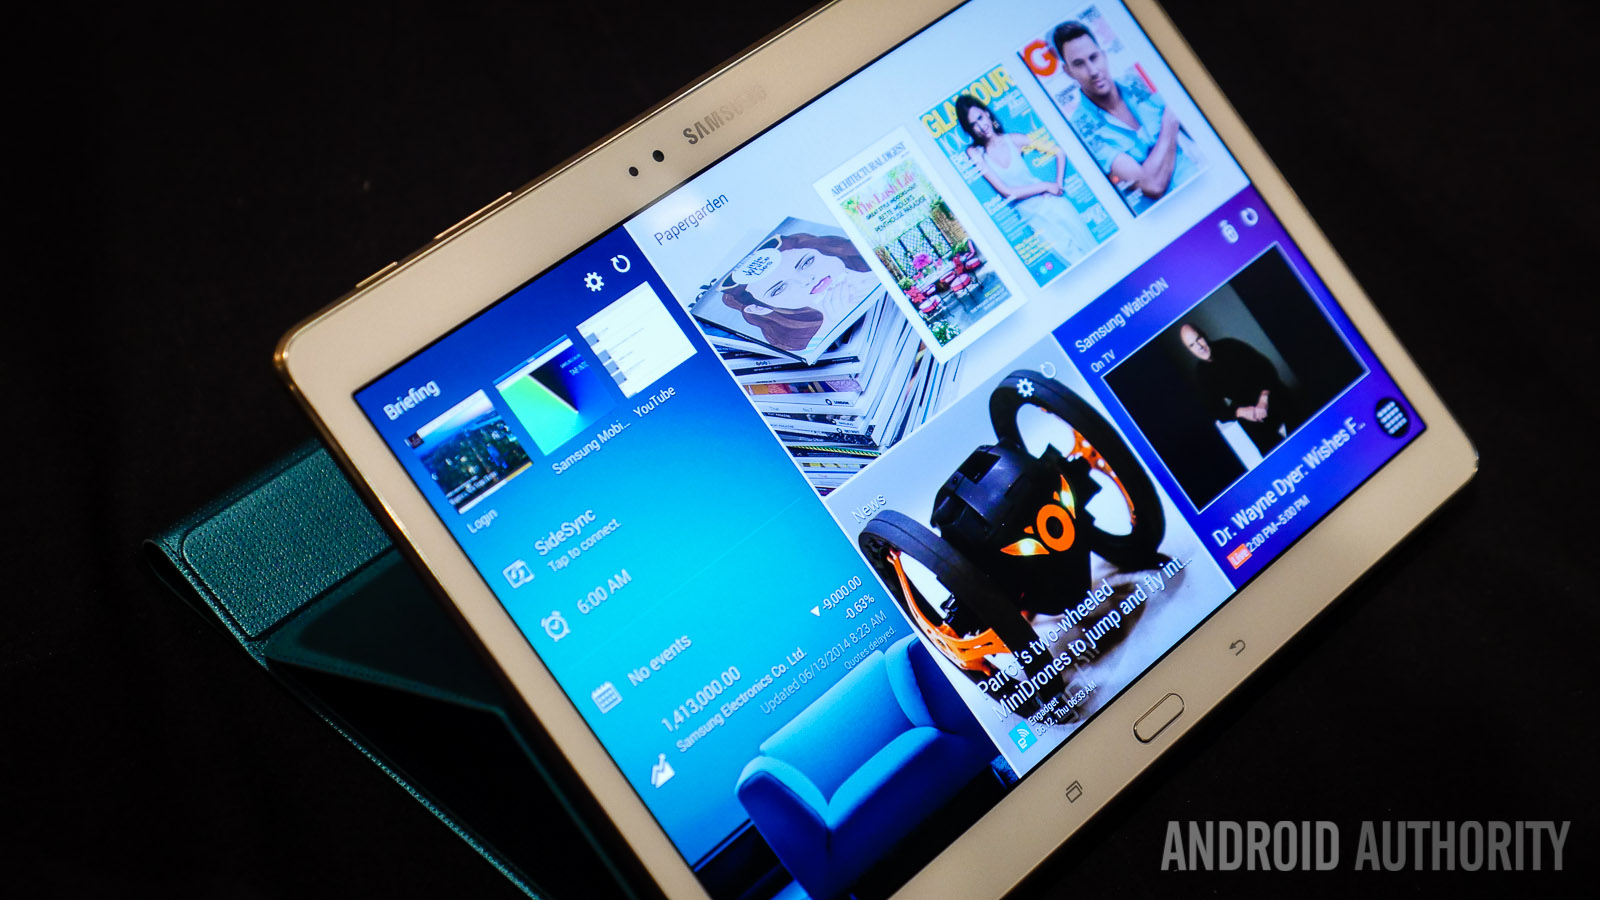 bulge Prove Mexico Android 5.0 Lollipop making its way to the AT&T Samsung Galaxy Tab S 10.5